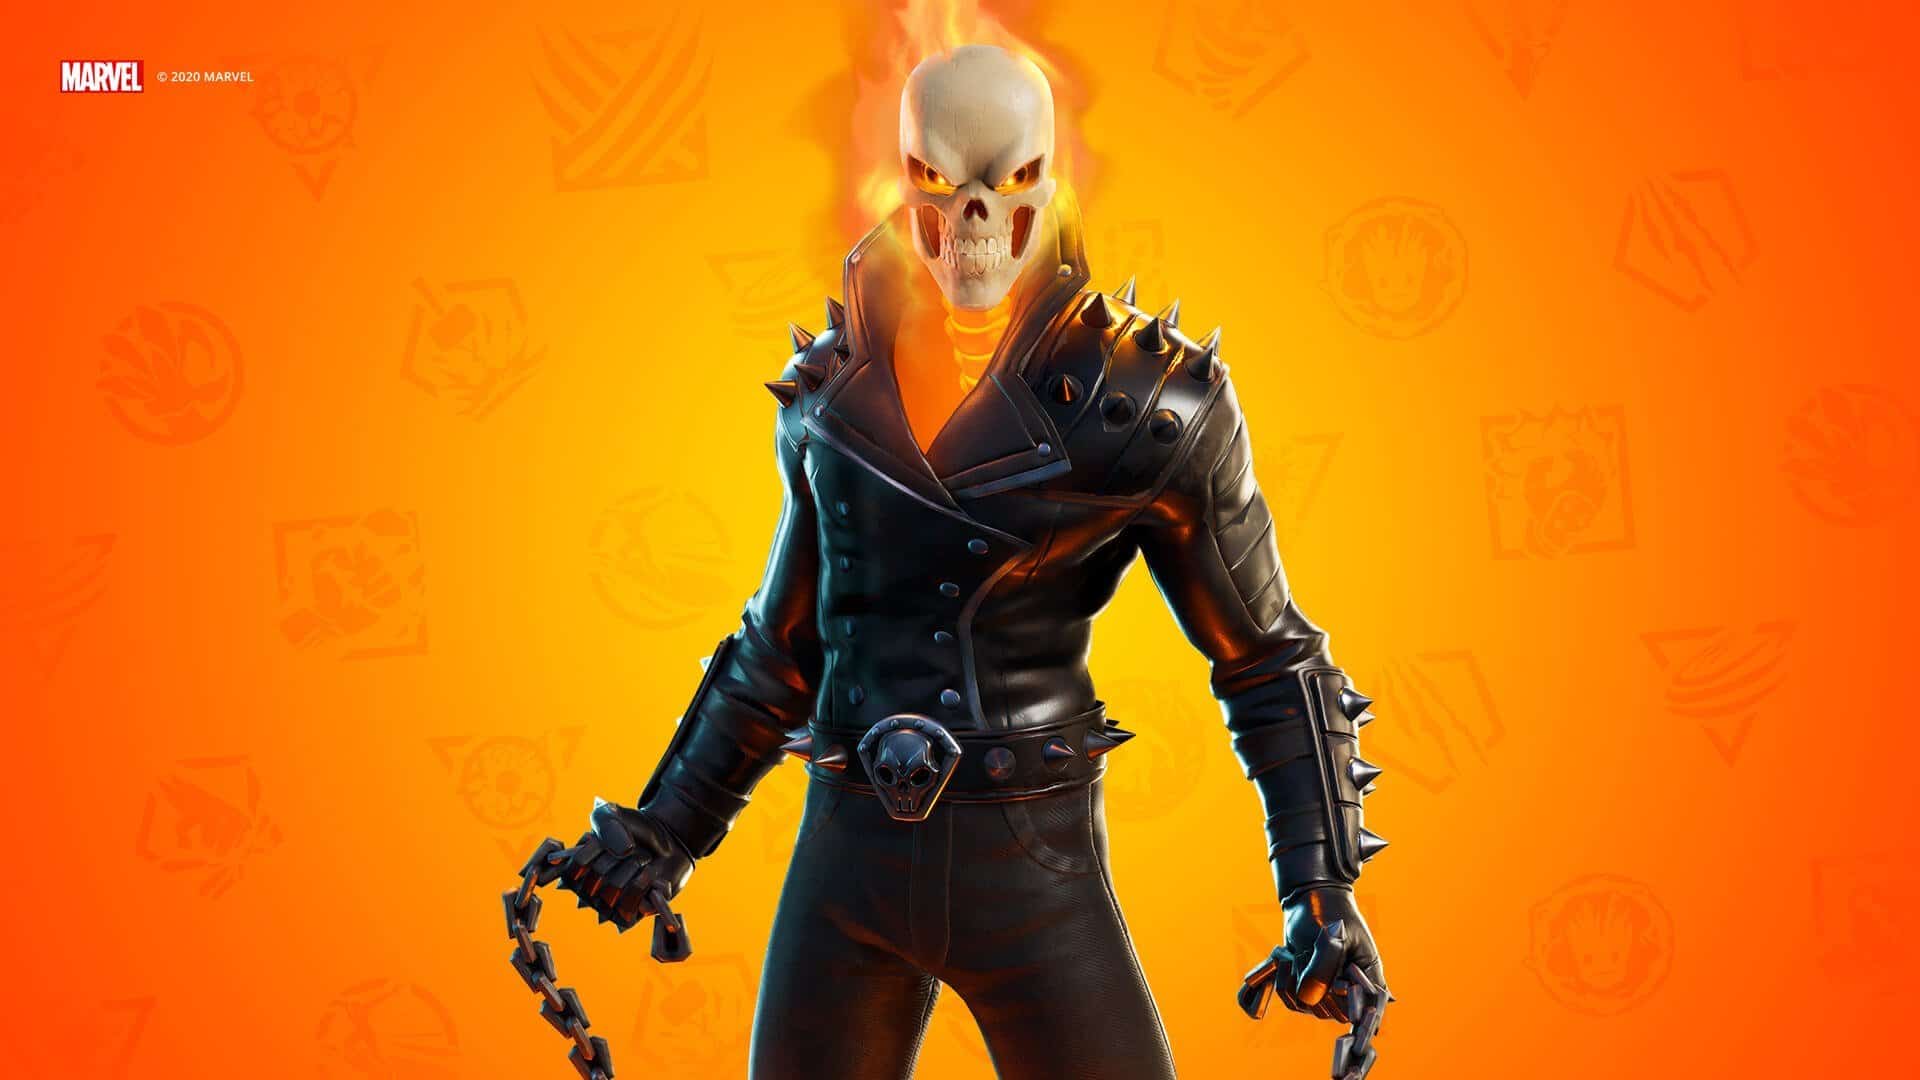 How to earn the Fortnite Ghost Rider skin for free